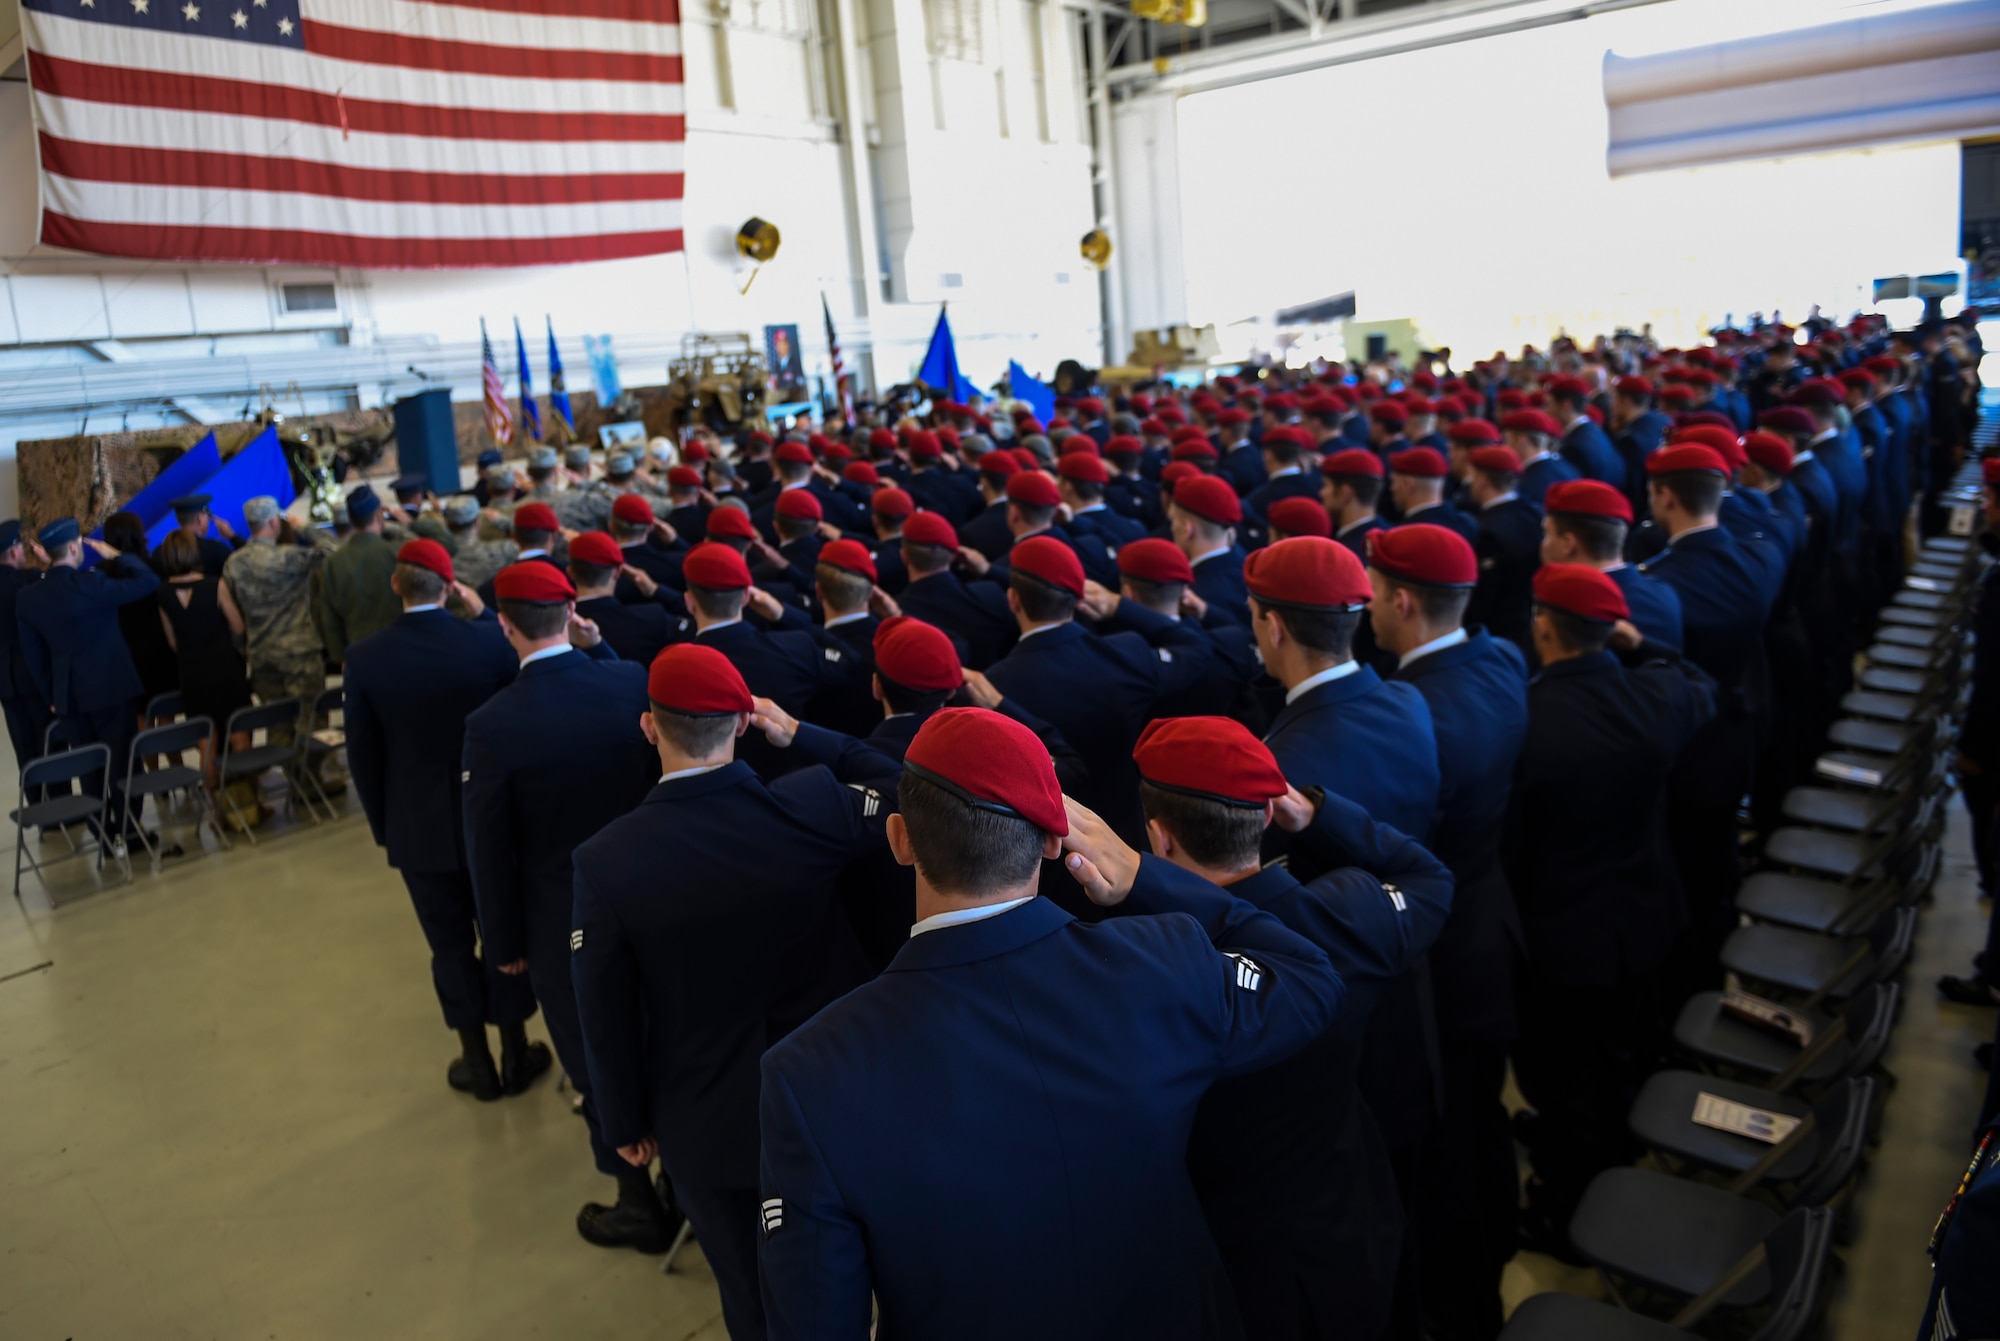 Airmen salute during Capt. Matthew D. Roland and Staff Sgt. Forrest B. Sibley’s memorial service, Sept. 14, 2015, at Hurlburt Field, Fla. More than 1000 friends and family members from across the country gathered together to mourn the loss of Capt. Matthew Roland, a special tactics officer from 23rd Special Tactics Squadron, and Staff Sgt. Forrest Sibley, a combat controller from the 21st Special Tactics Squadron, at the Freedom Hangar on Hurlburt Field, Fla., Sep. 14, 2015. The two Special Tactics Airmen, who had recently deployed to Afghanistan in support of Operation Freedom's Sentinel, were shot at a vehicle checkpoint at Camp   Antonik, Afghanistan, Aug. 26, and died of wounds sustained in the attack, were honored in a private memorial.  Both Special Tactics Airmen will be buried with full military honors.(U.S. Air Force photo by Senior Airman Ryan Conroy/Released) 

